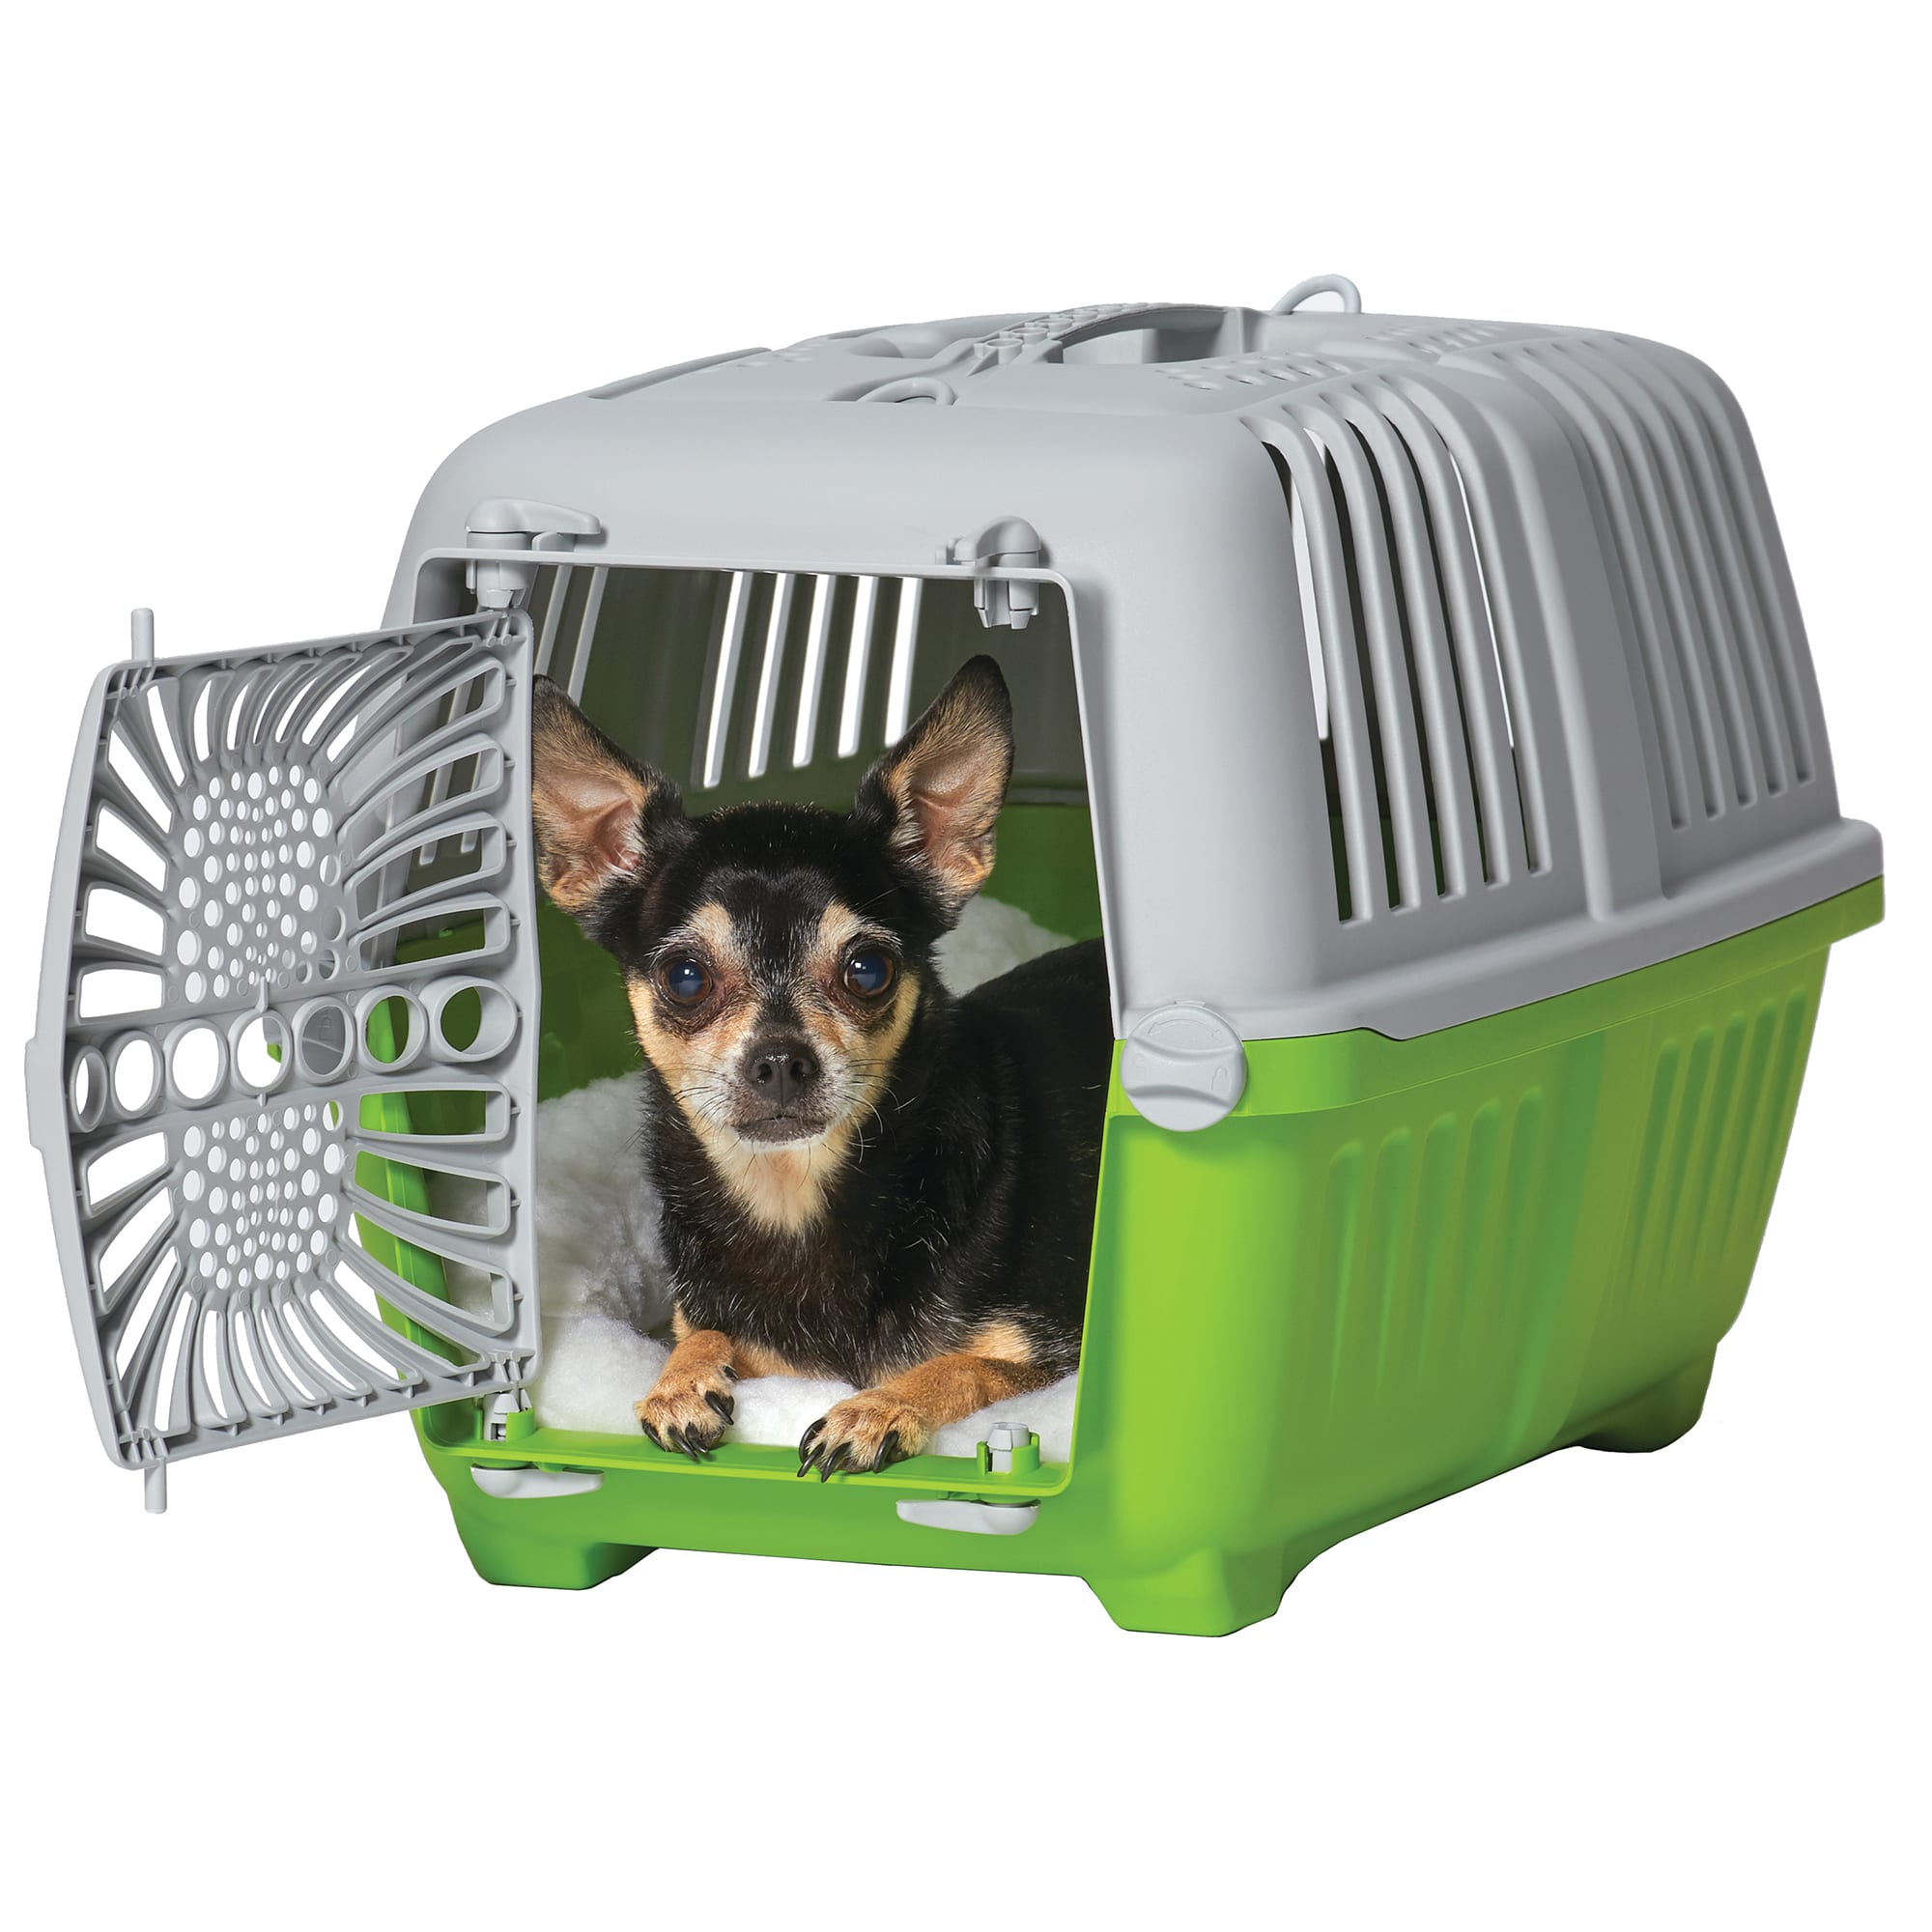 Midwest Spree Plastic Green Pet Travel Carrier, 18.9